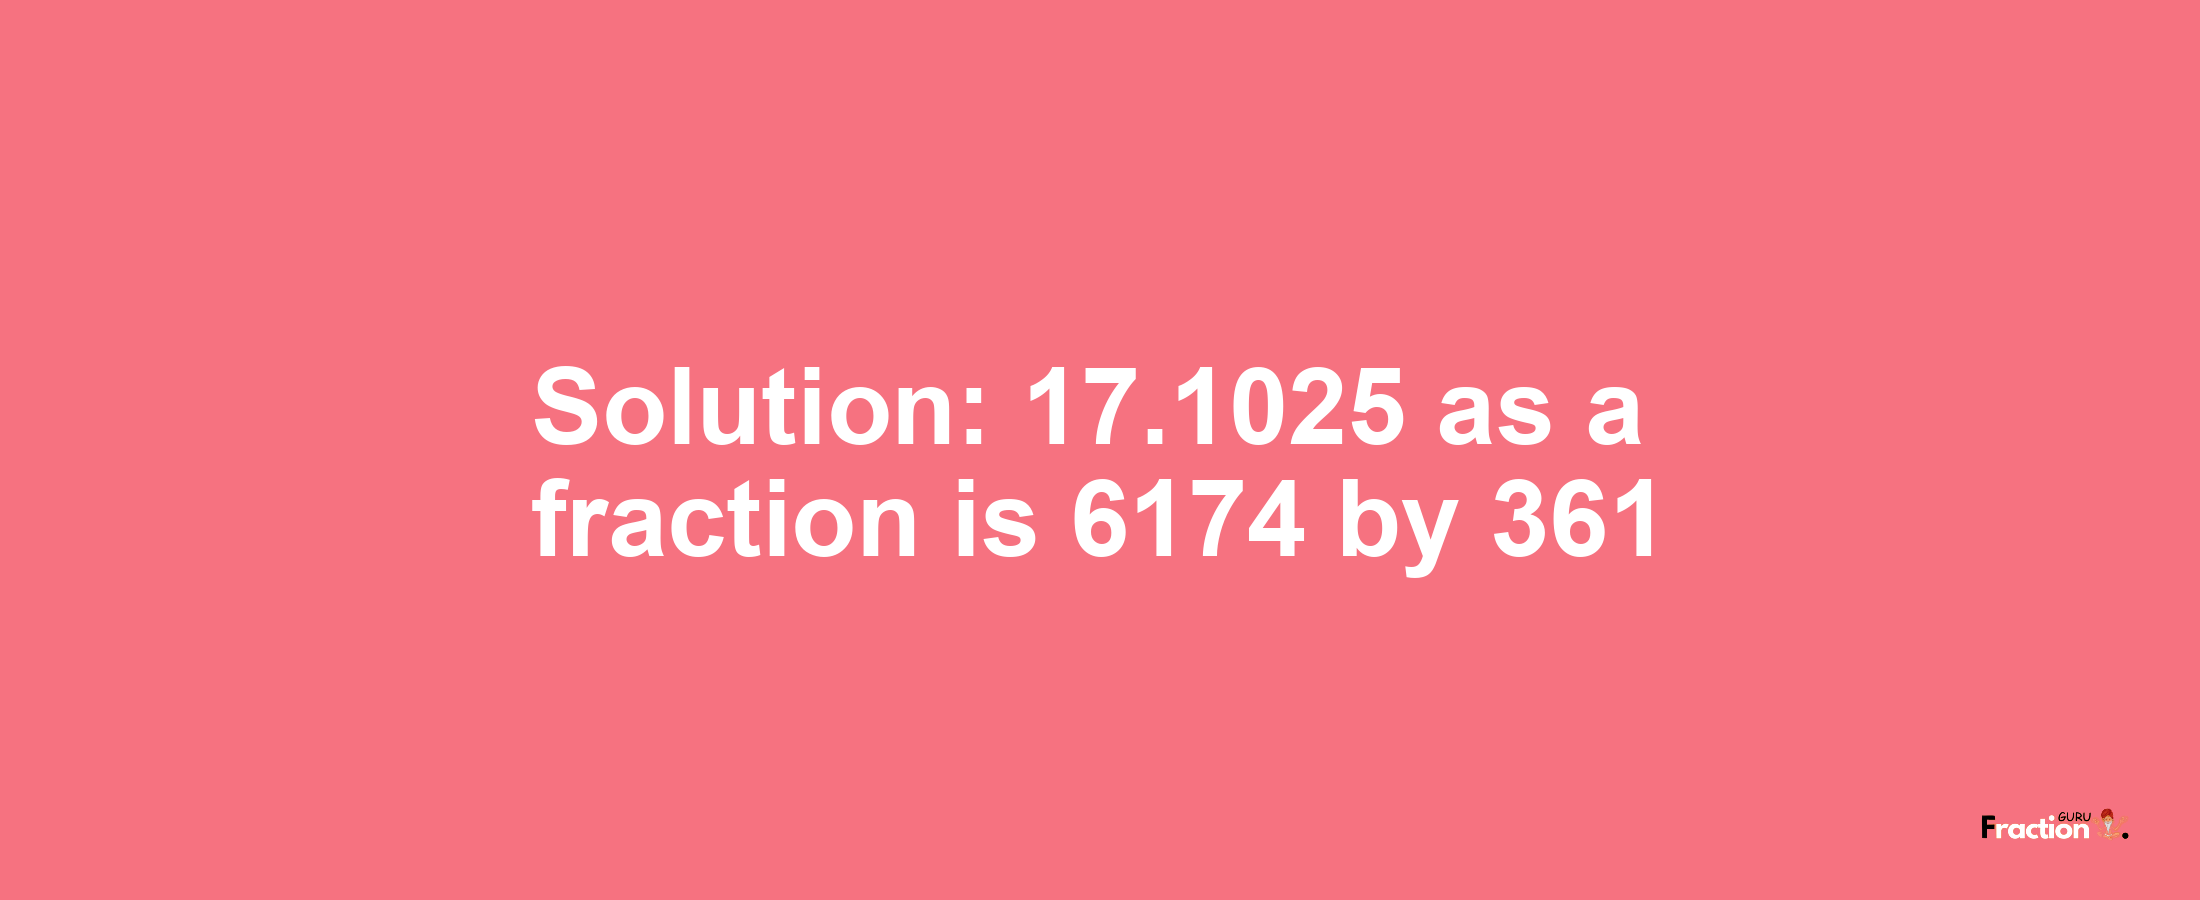 Solution:17.1025 as a fraction is 6174/361